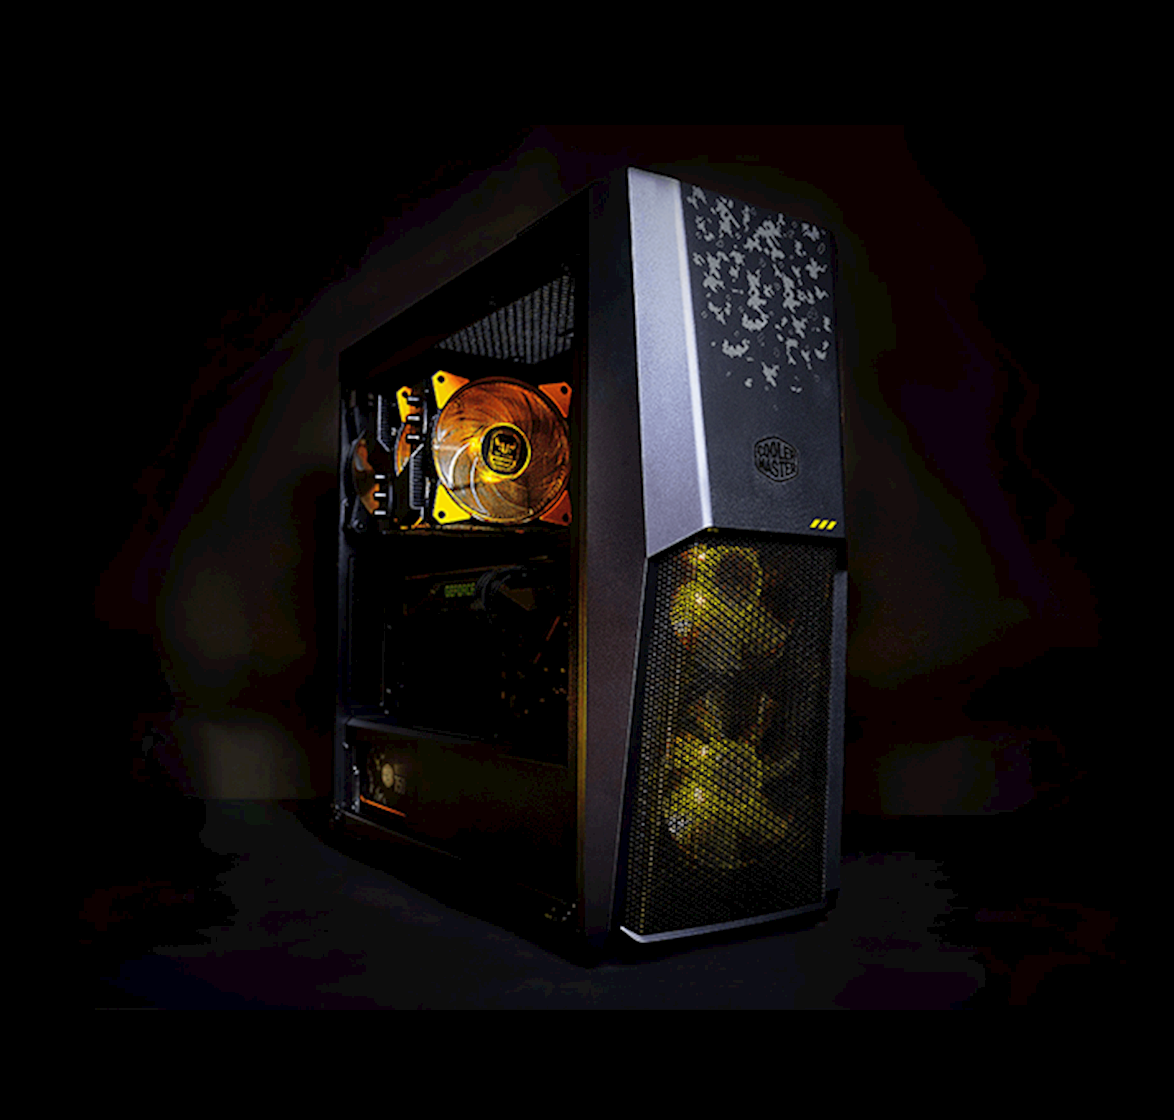 Cooler Master MasterBox MB500 TUF Gaming Alliance Edition ATX Mid-Tower w/TUF Aesthetic Design Semi-Meshed Front Ventilation Tempered Glass Side Panel & 3X 120mm RGB Fans